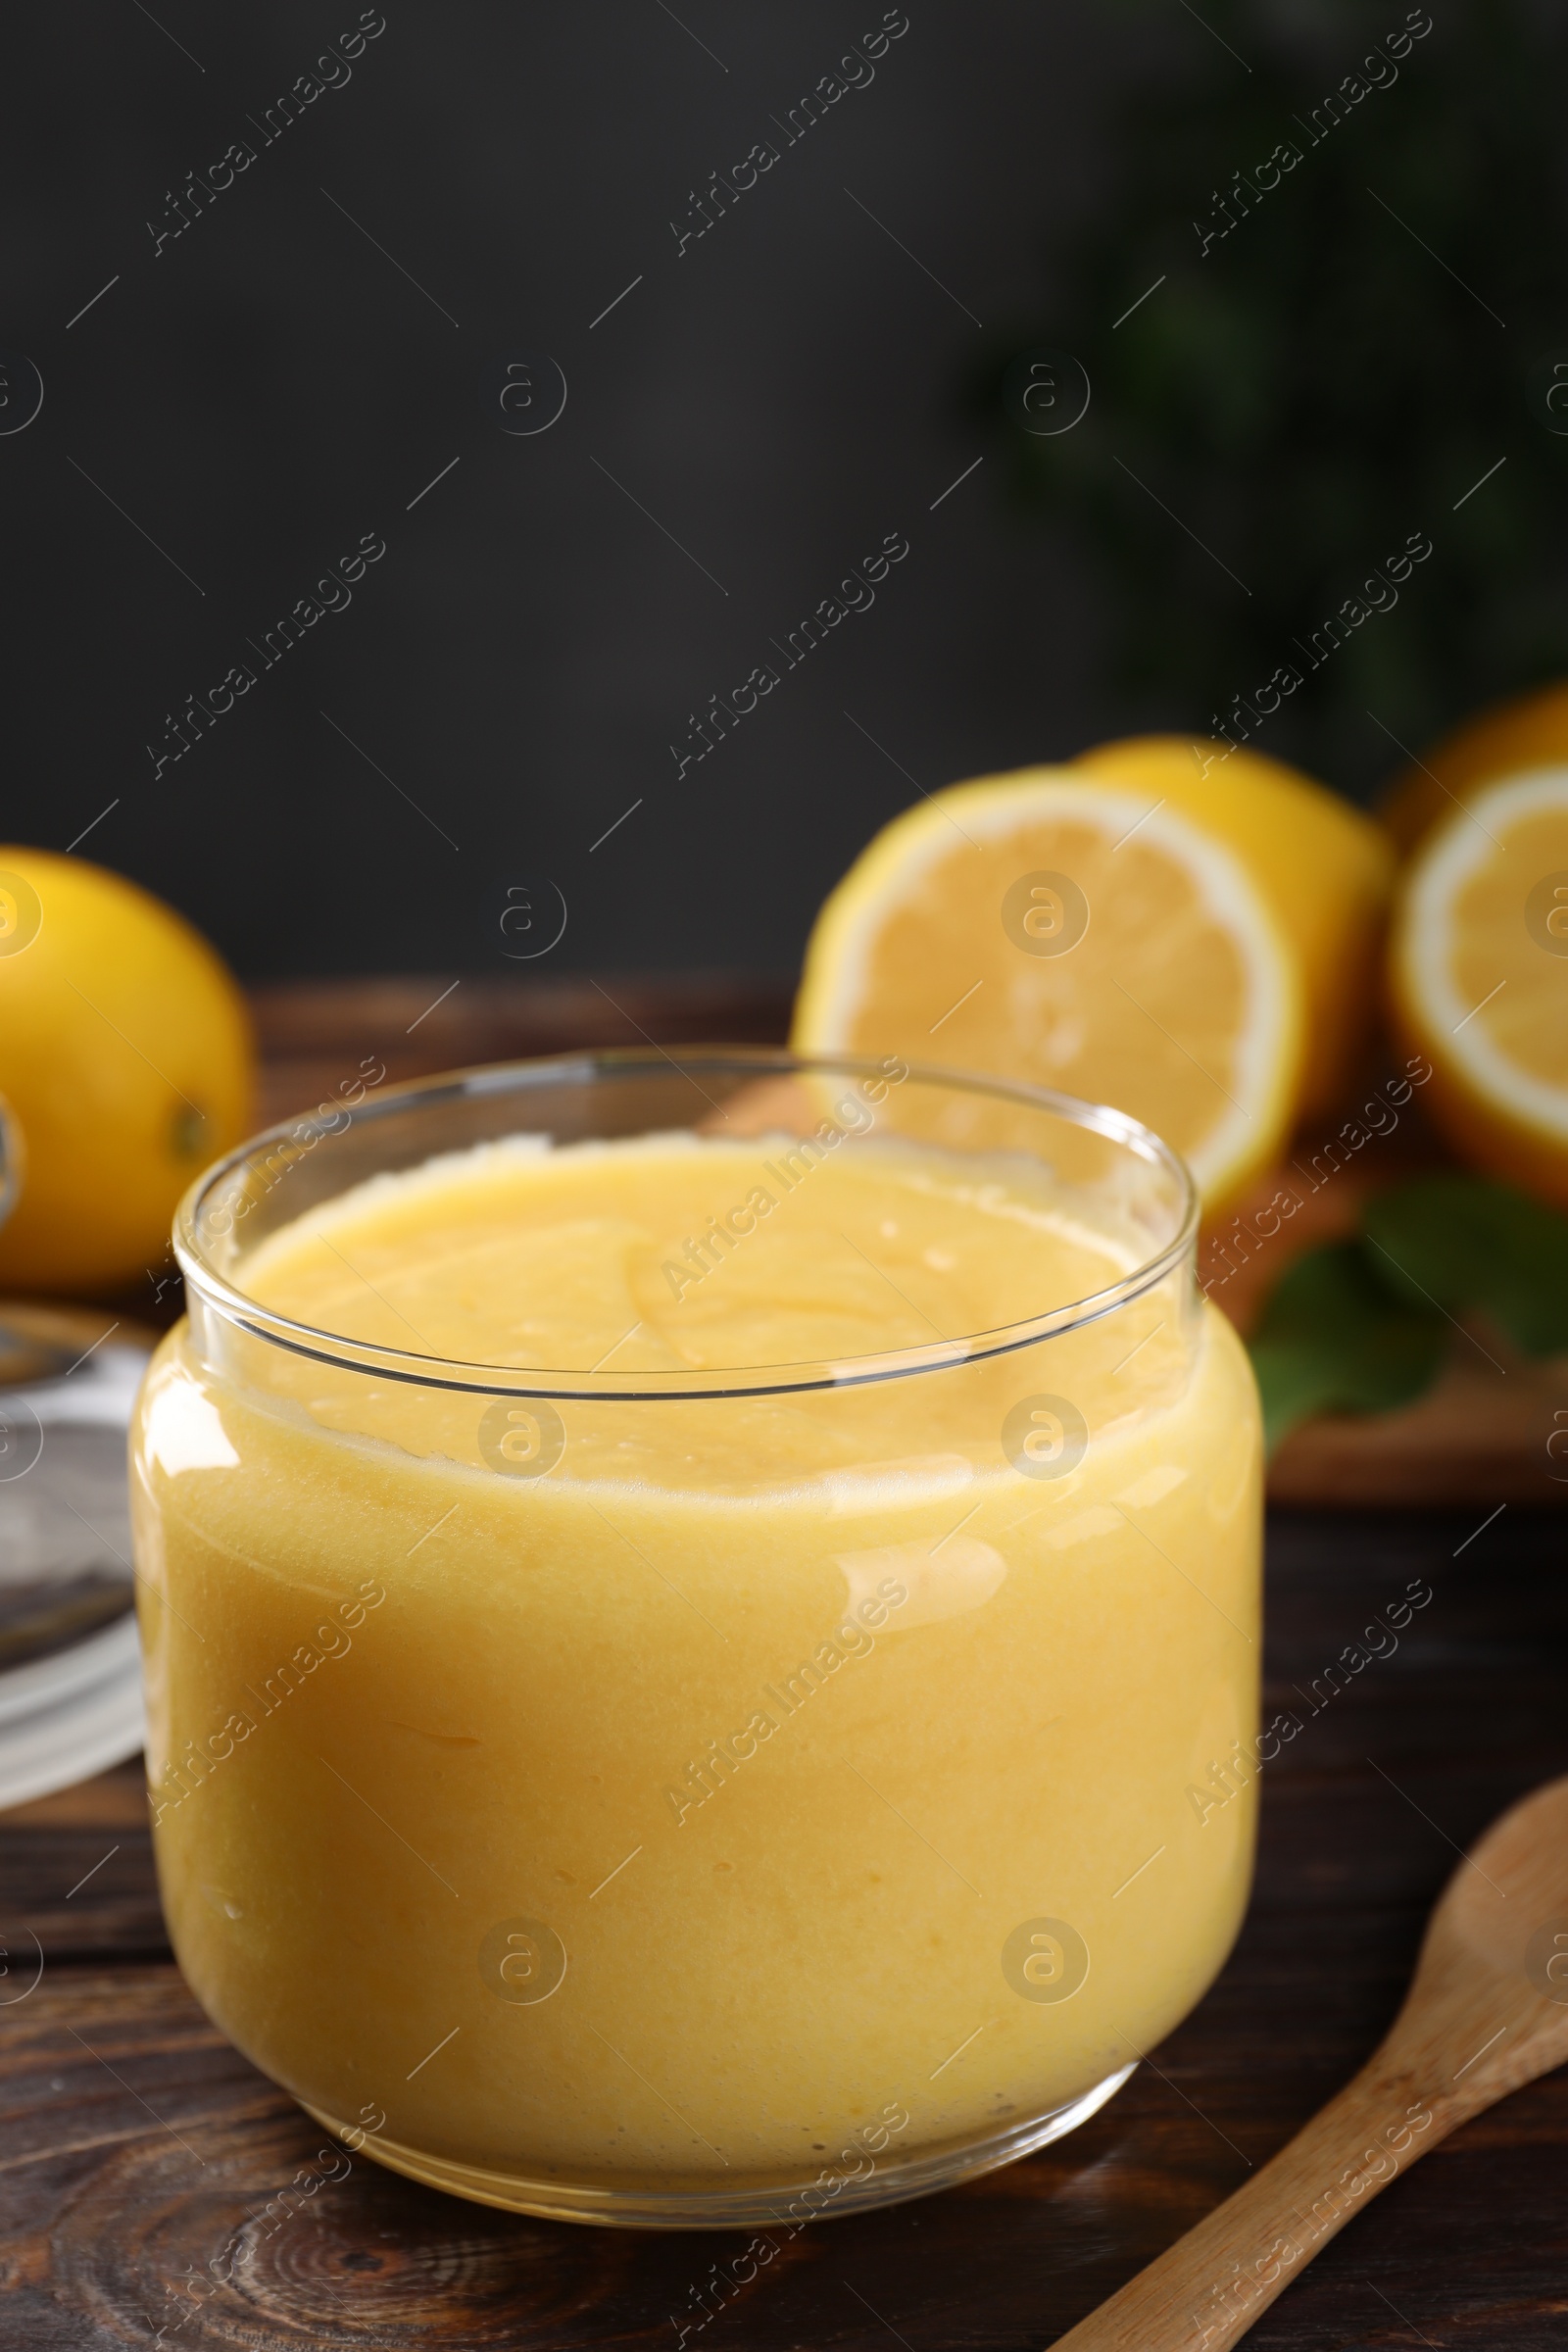 Photo of Delicious lemon curd in glass jar, fresh citrus fruits and spoon on wooden table